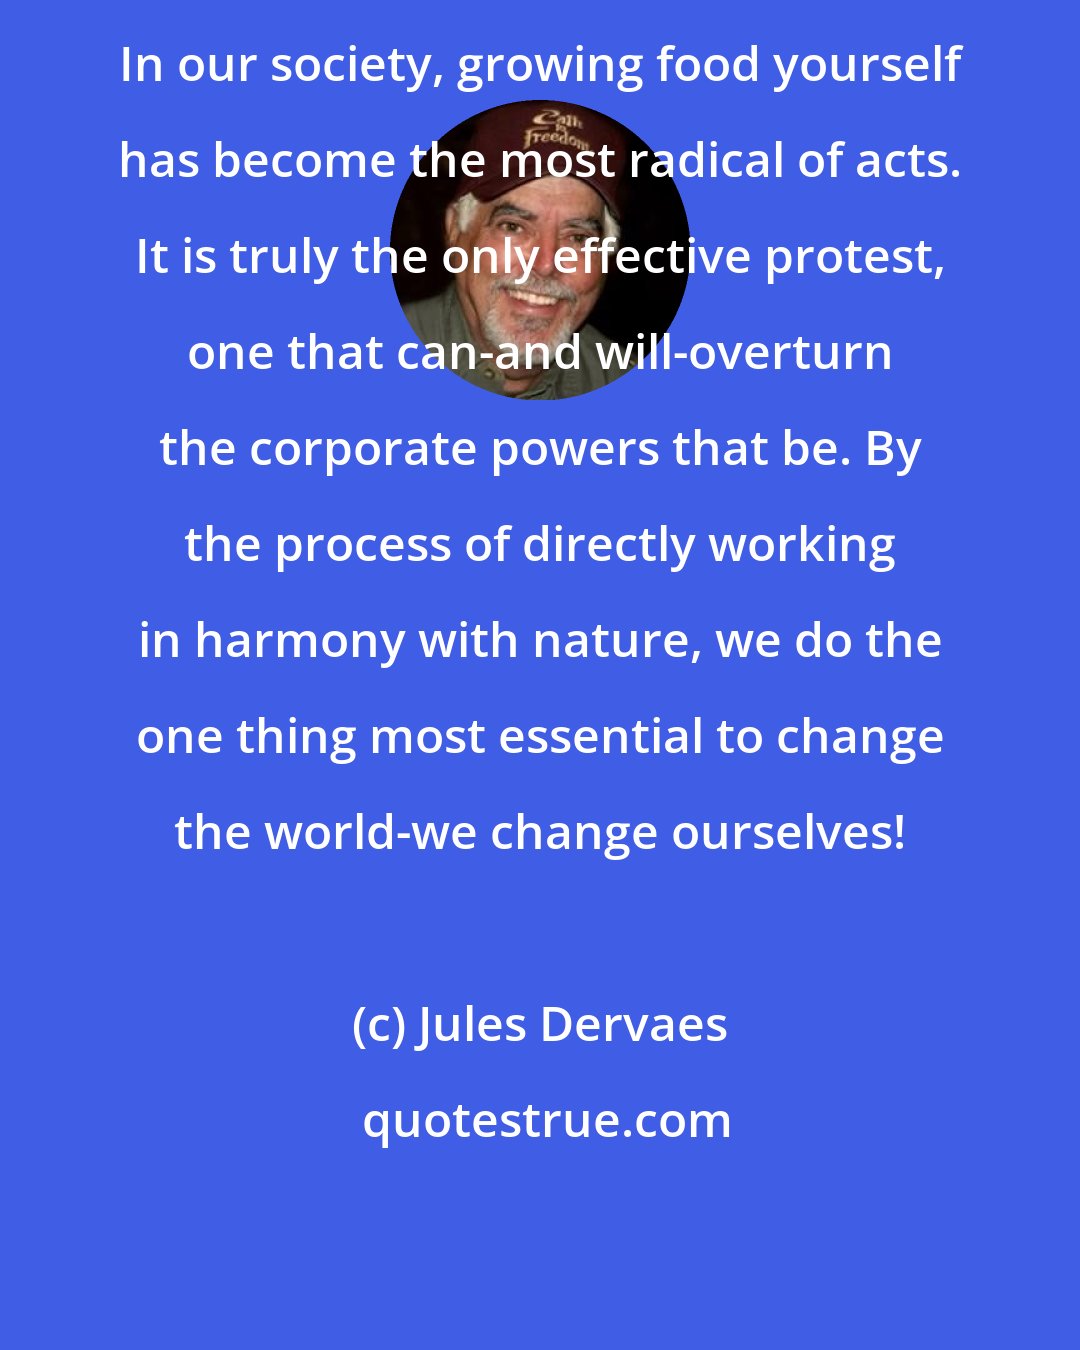 Jules Dervaes: In our society, growing food yourself has become the most radical of acts. It is truly the only effective protest, one that can-and will-overturn the corporate powers that be. By the process of directly working in harmony with nature, we do the one thing most essential to change the world-we change ourselves!